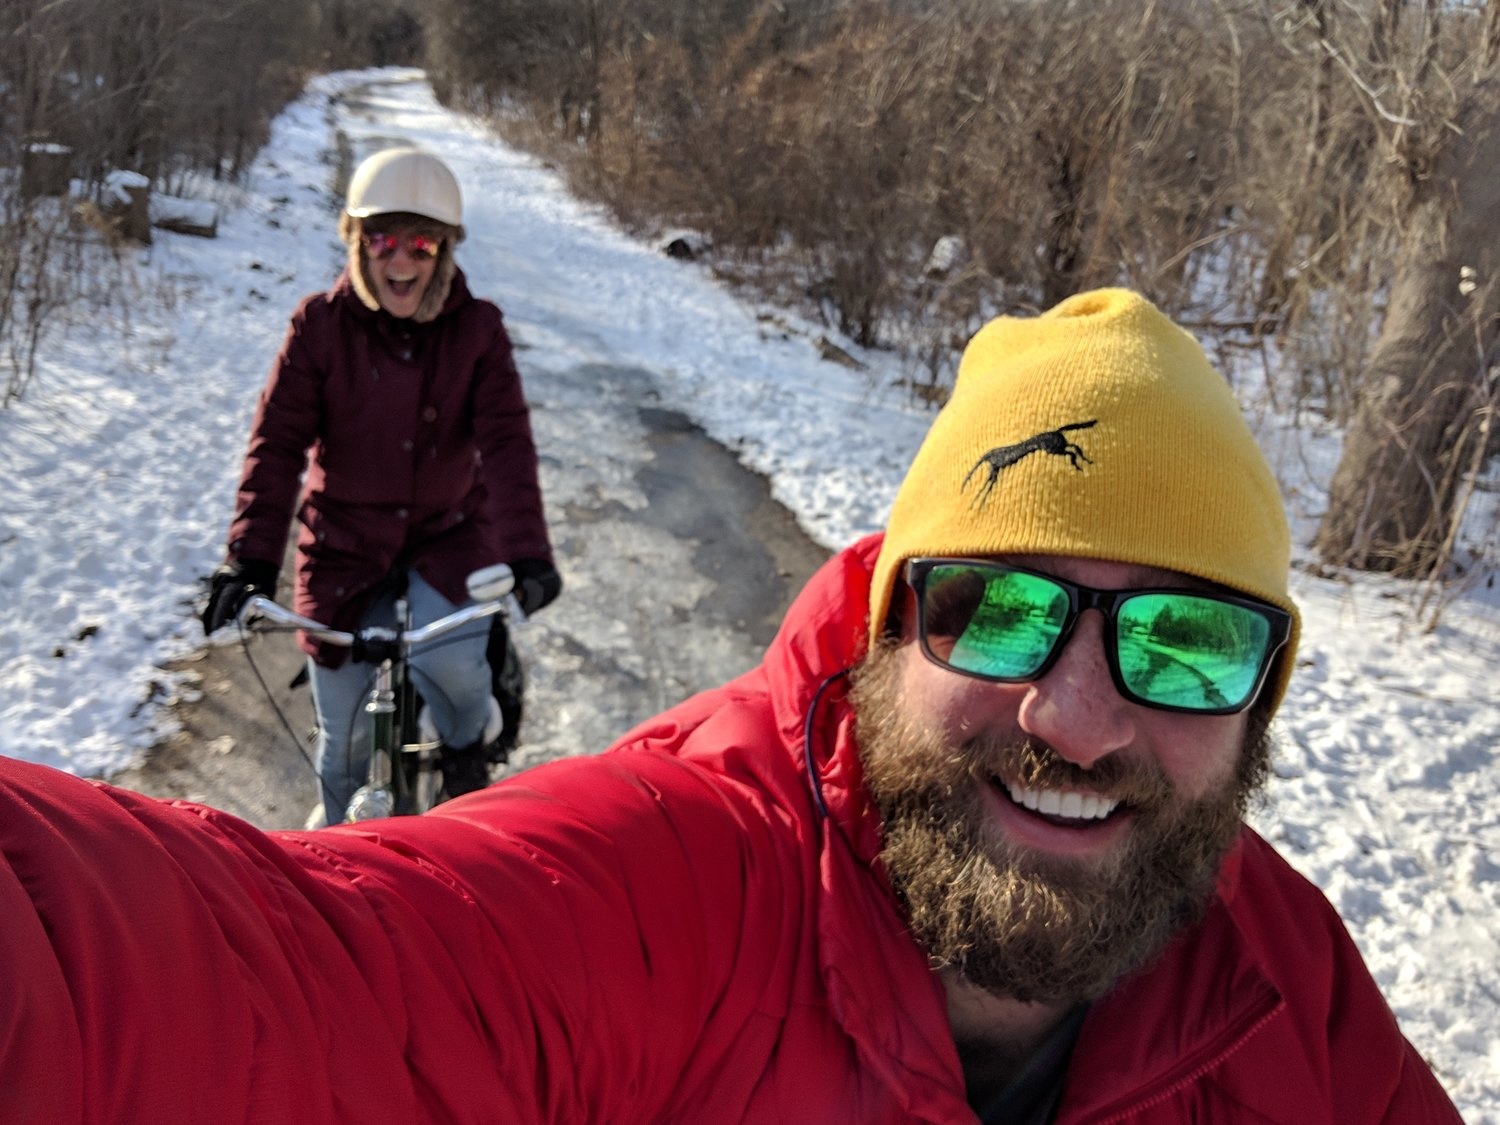 Ben takes a selfie over his shoulder as he rides a snowy winter path; a woman smiles on her bike behind him